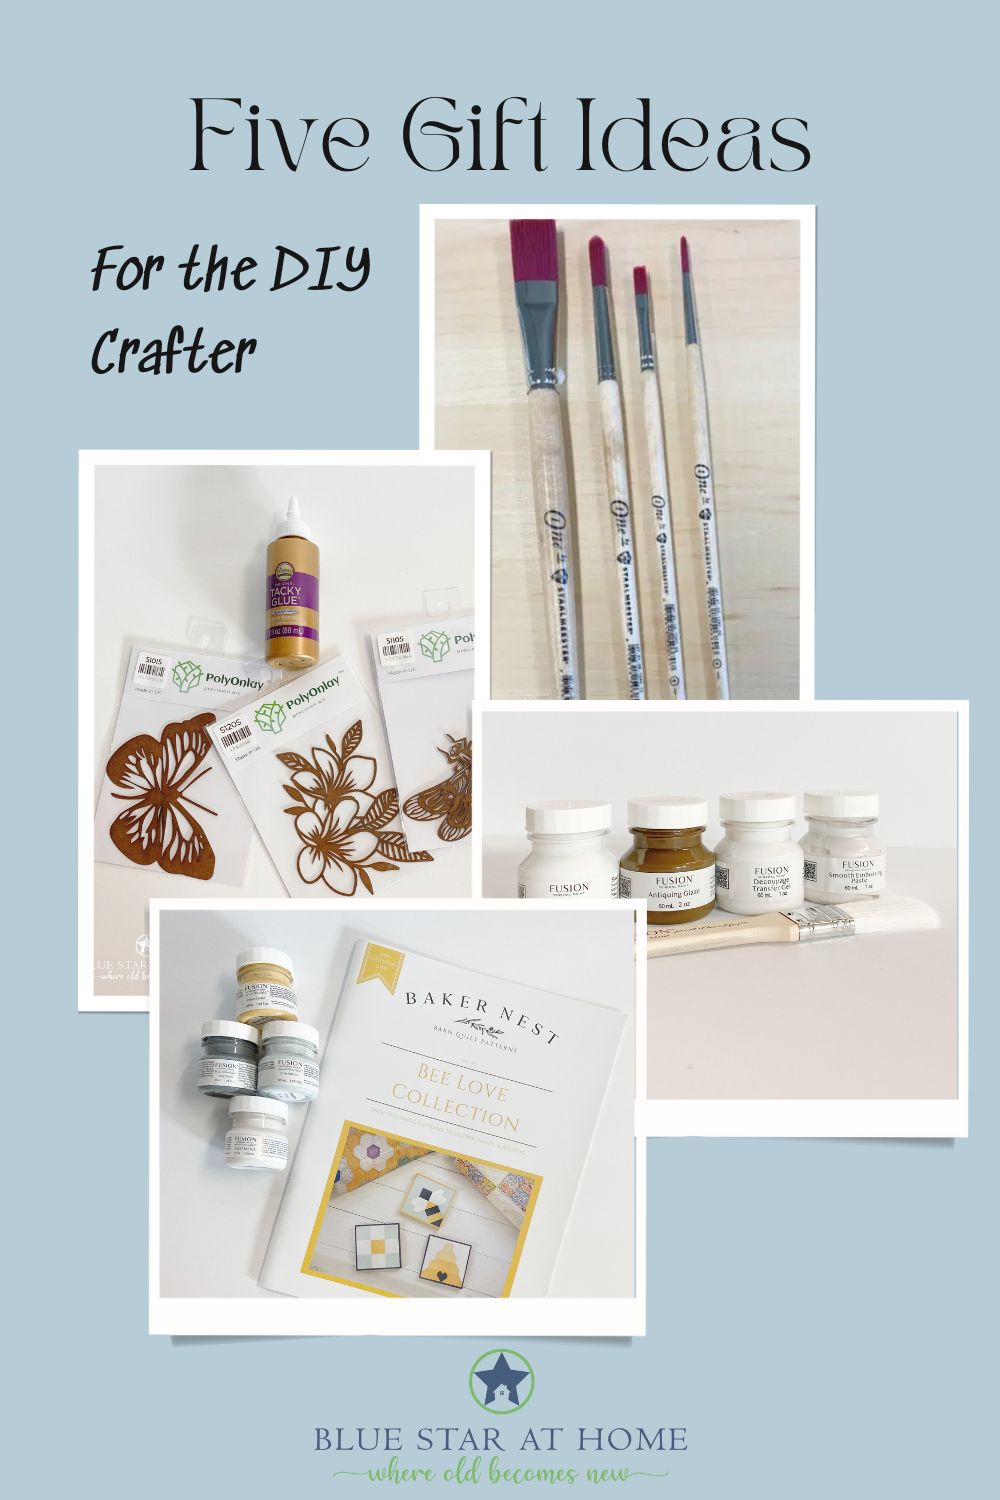 Five gift ideas for DIY Crafters